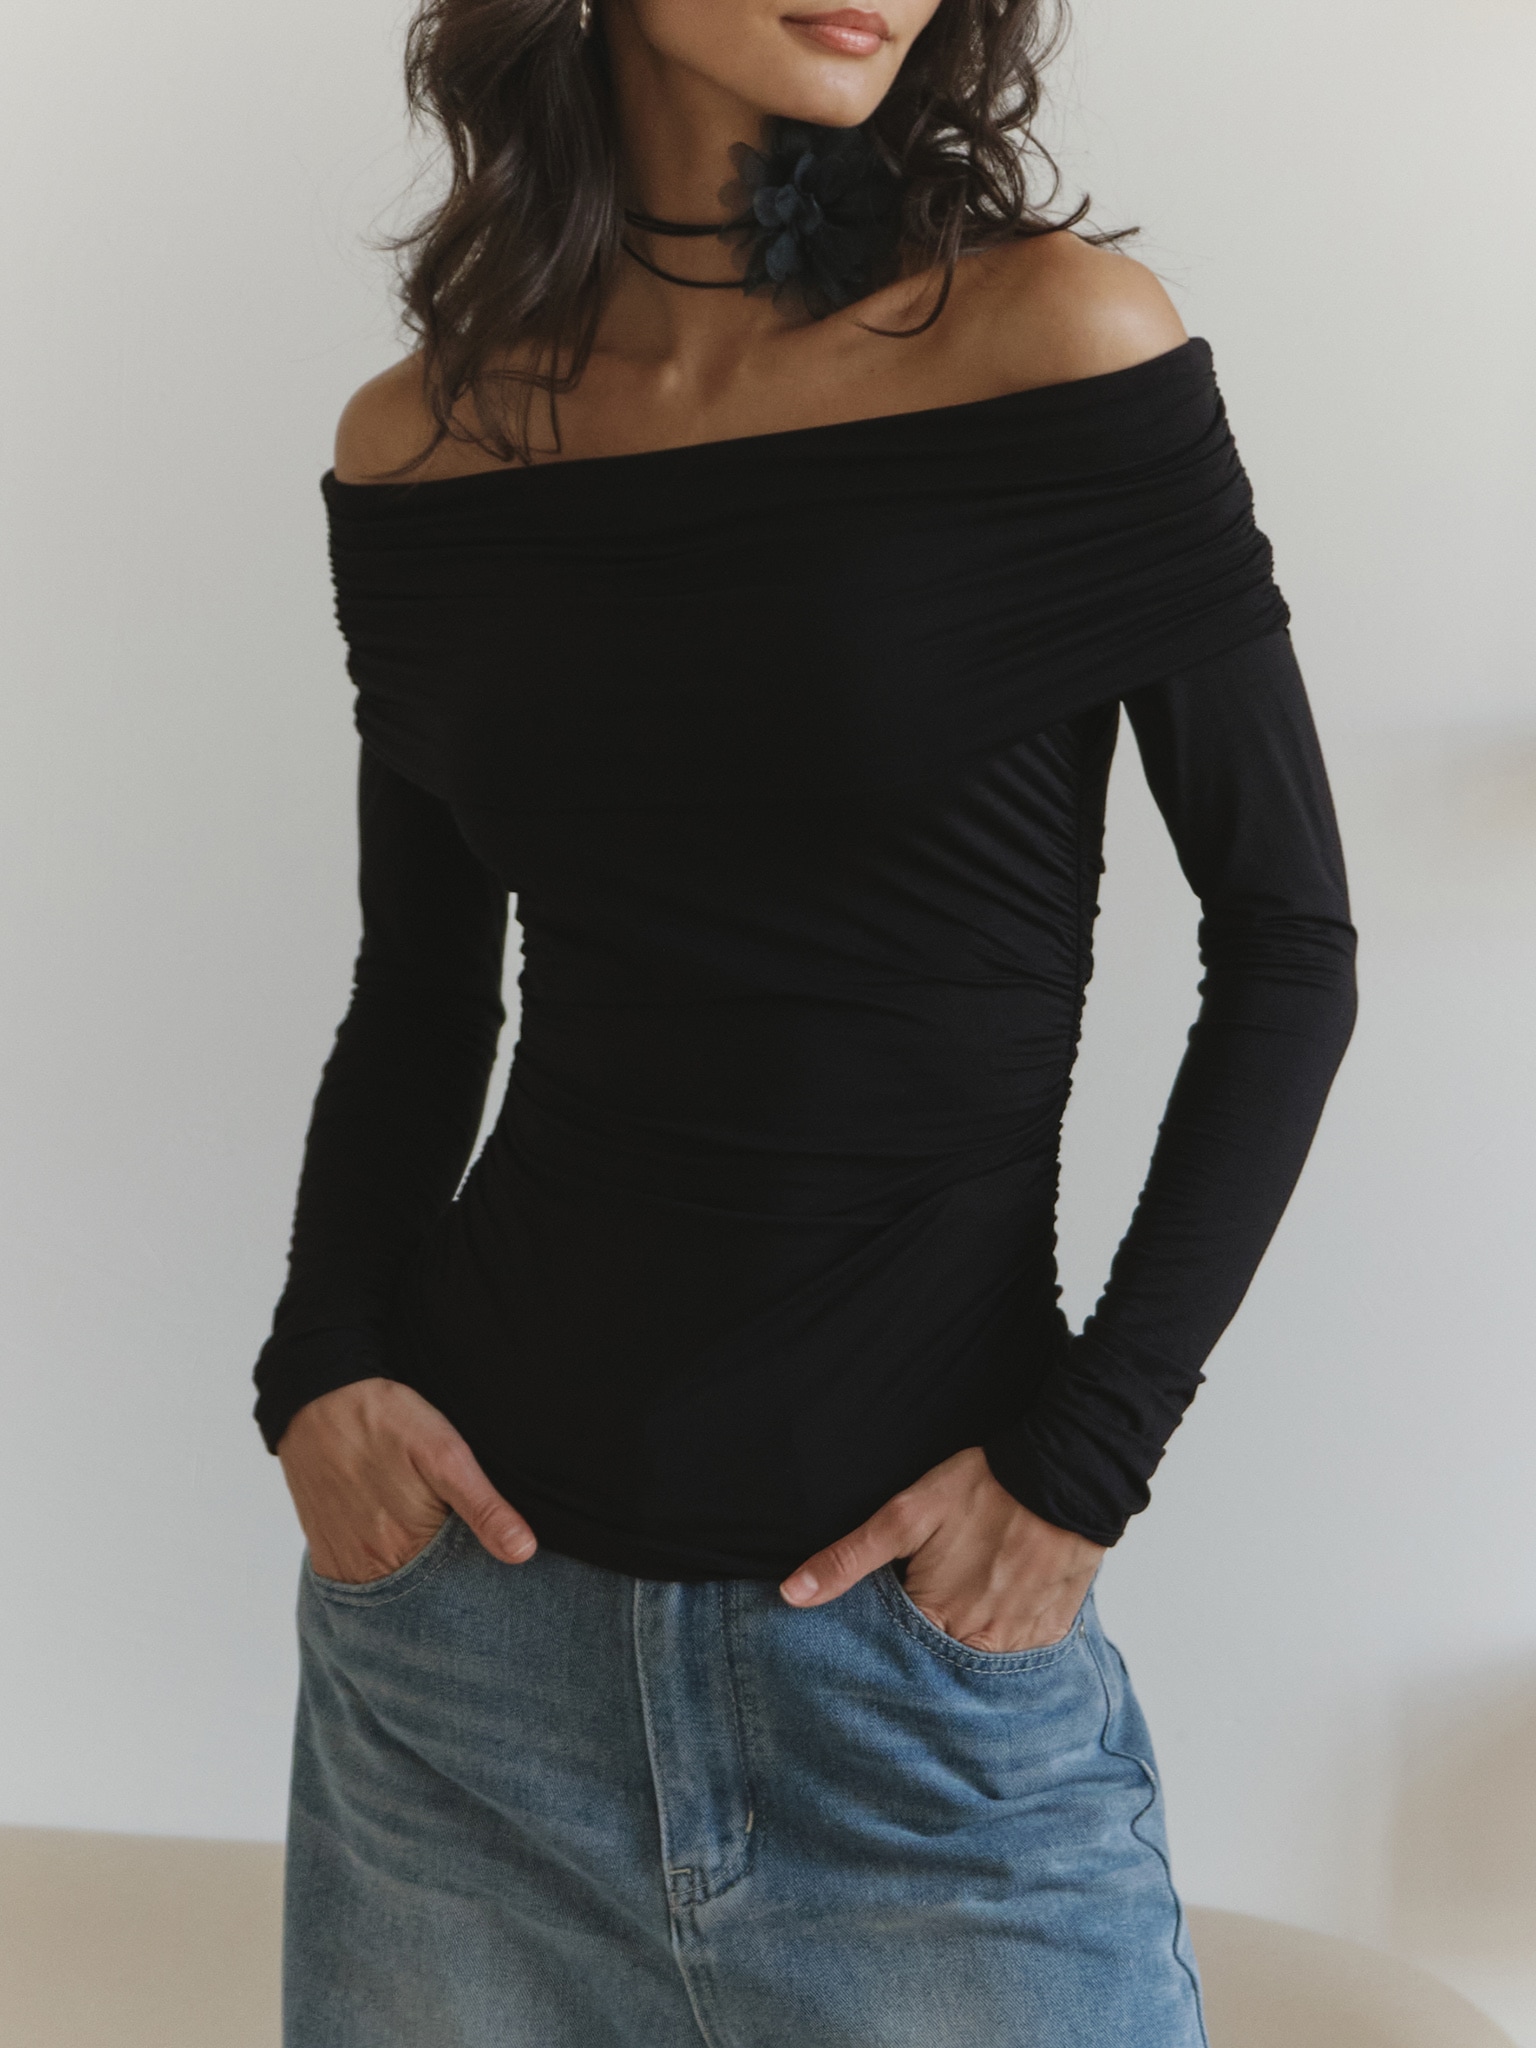 Top with open shoulders and draping on bodice